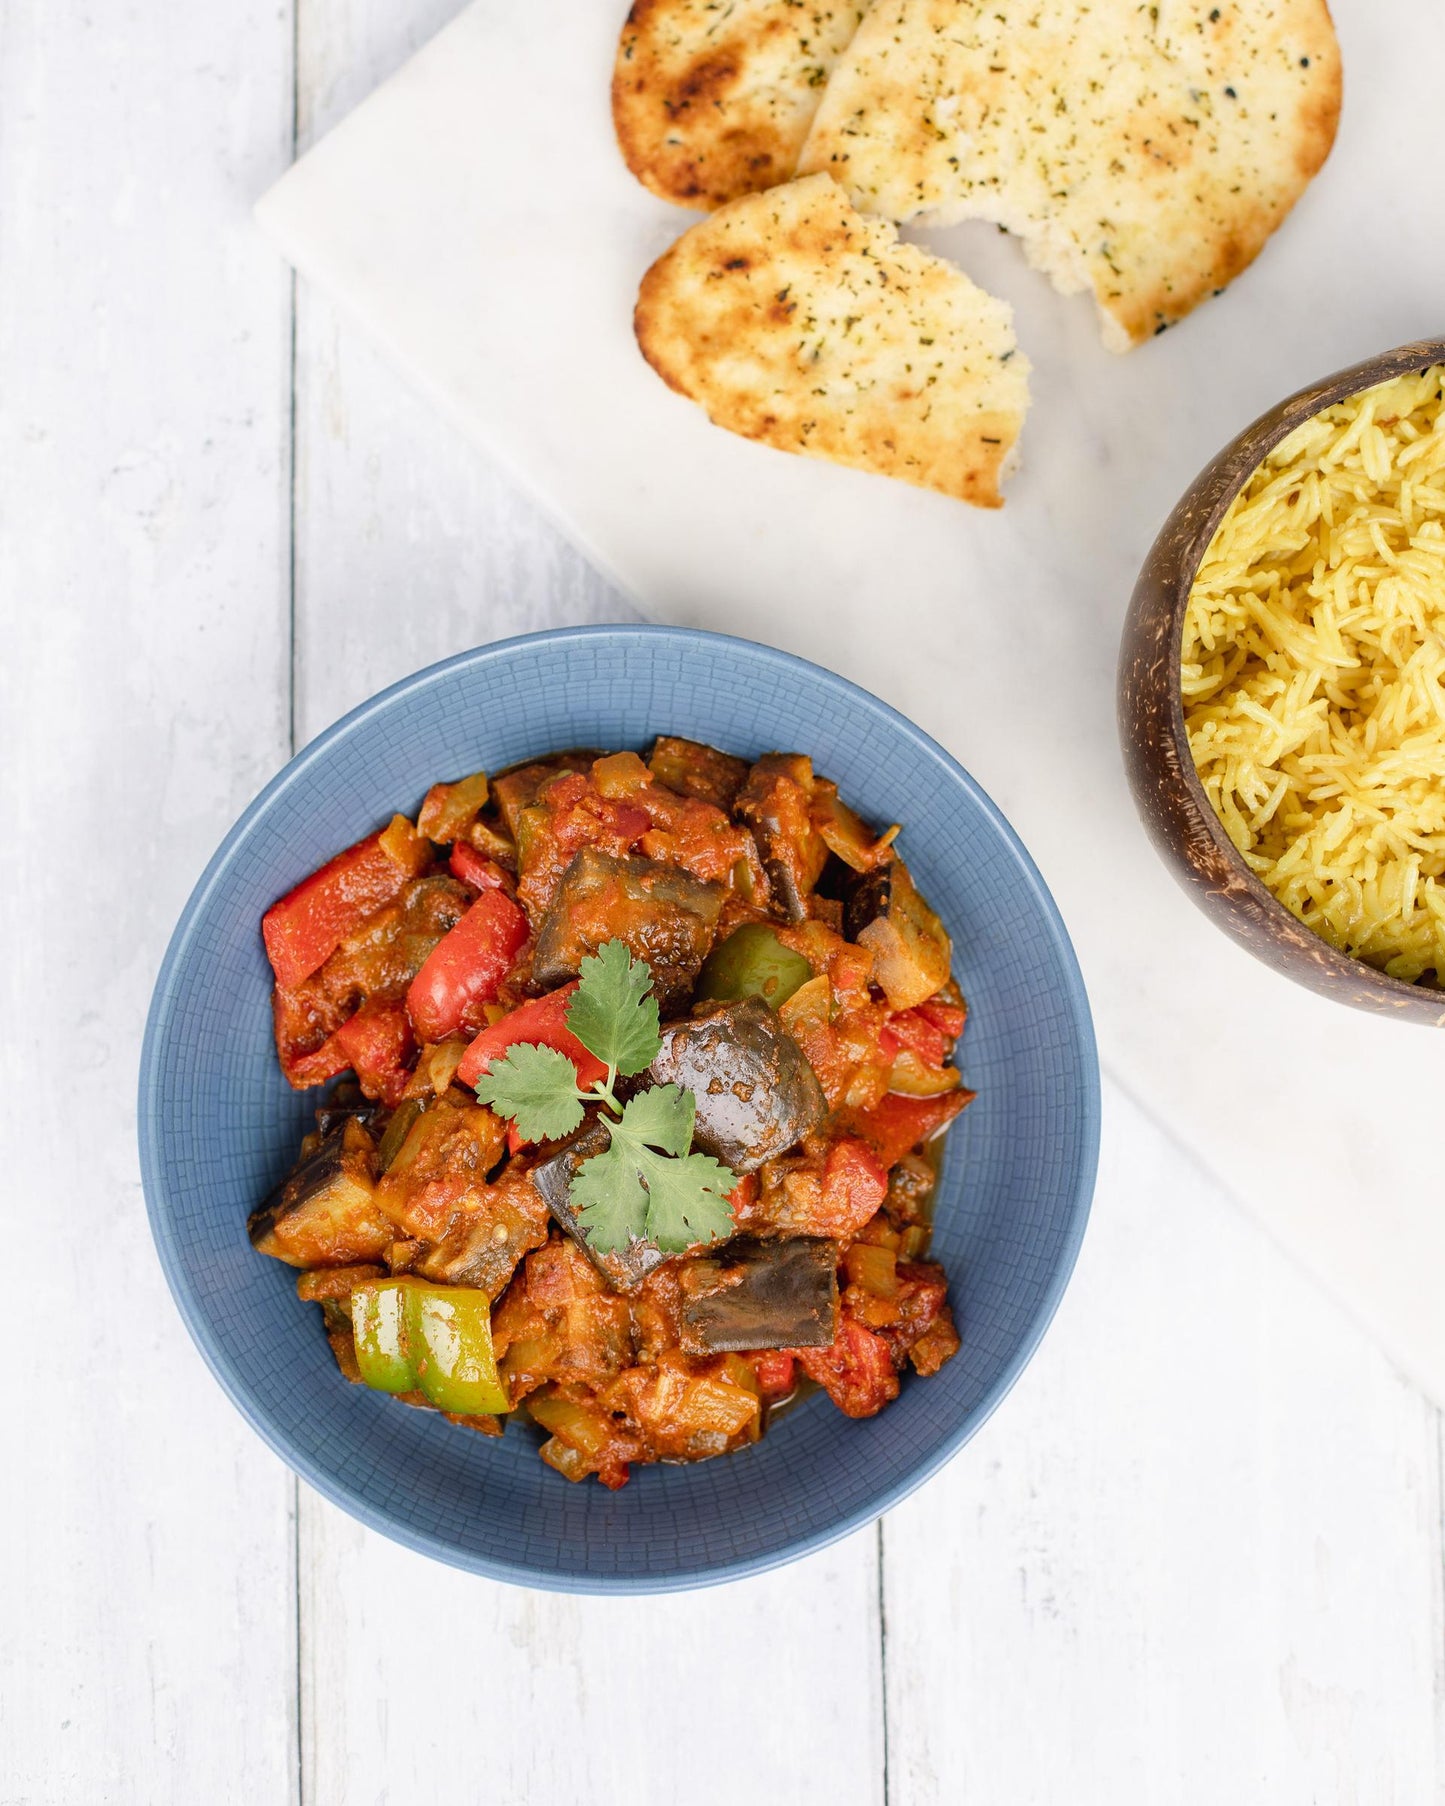 The Vegan Fakeaway Feasts Curry Kit